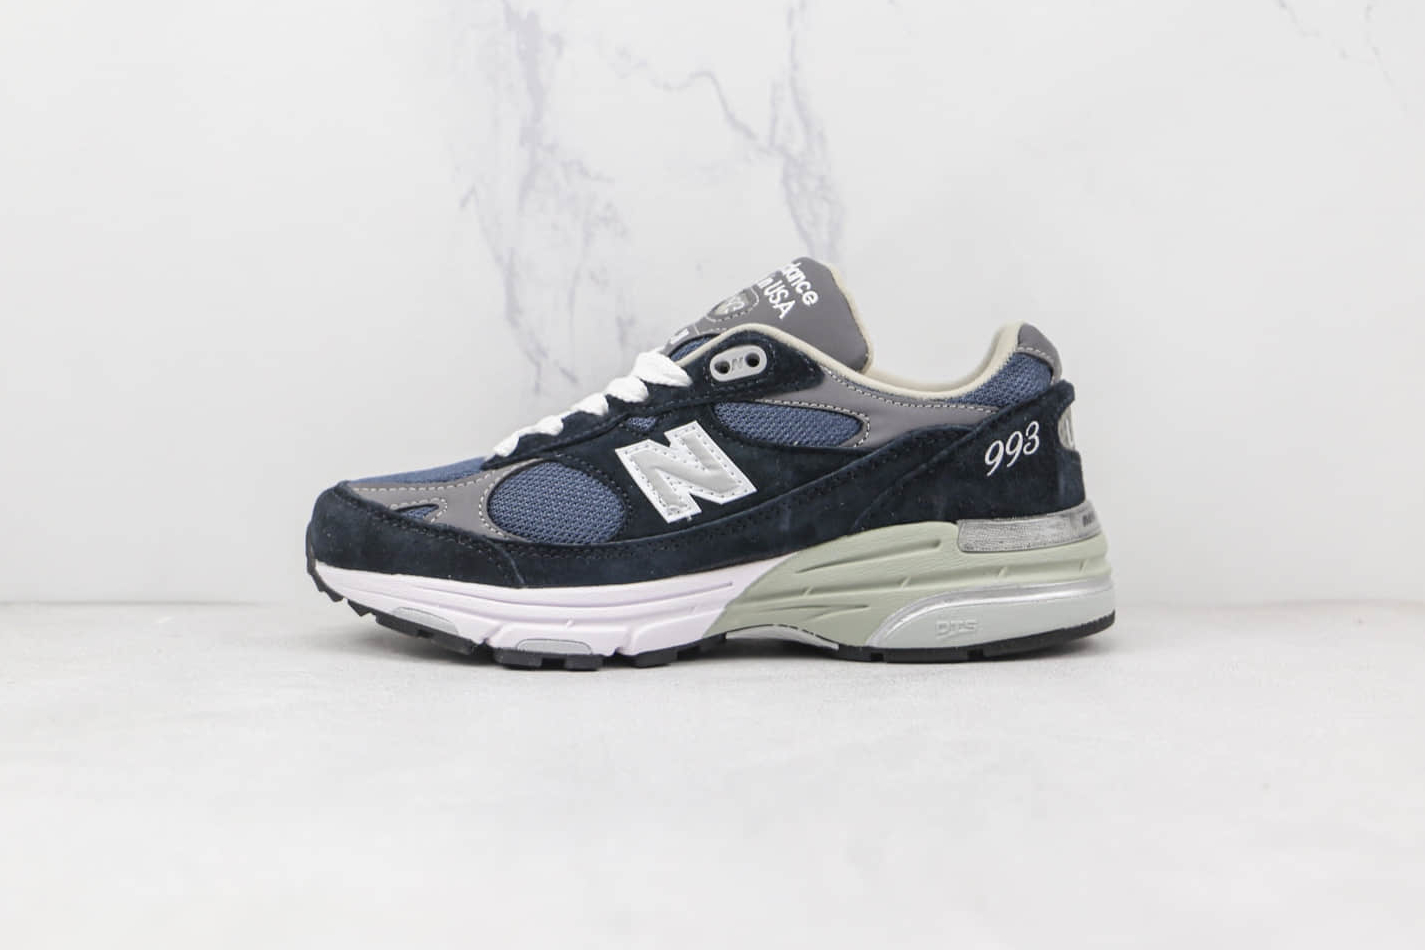 New Balance 993 'Navy White' MR993NV - Performance and Style in Navy White